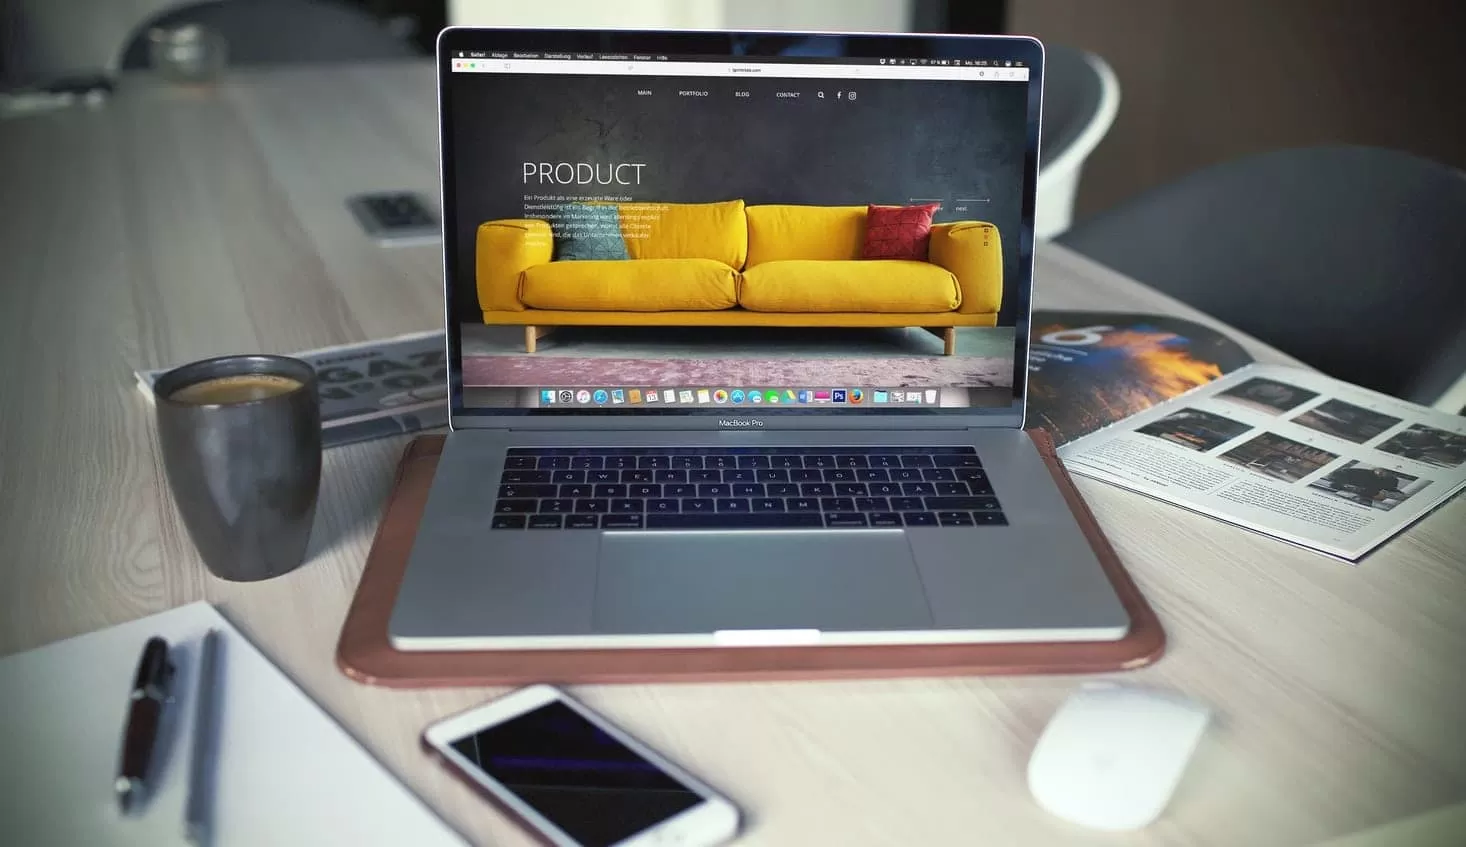 Apple Macbook and iPhone with website of sofa company